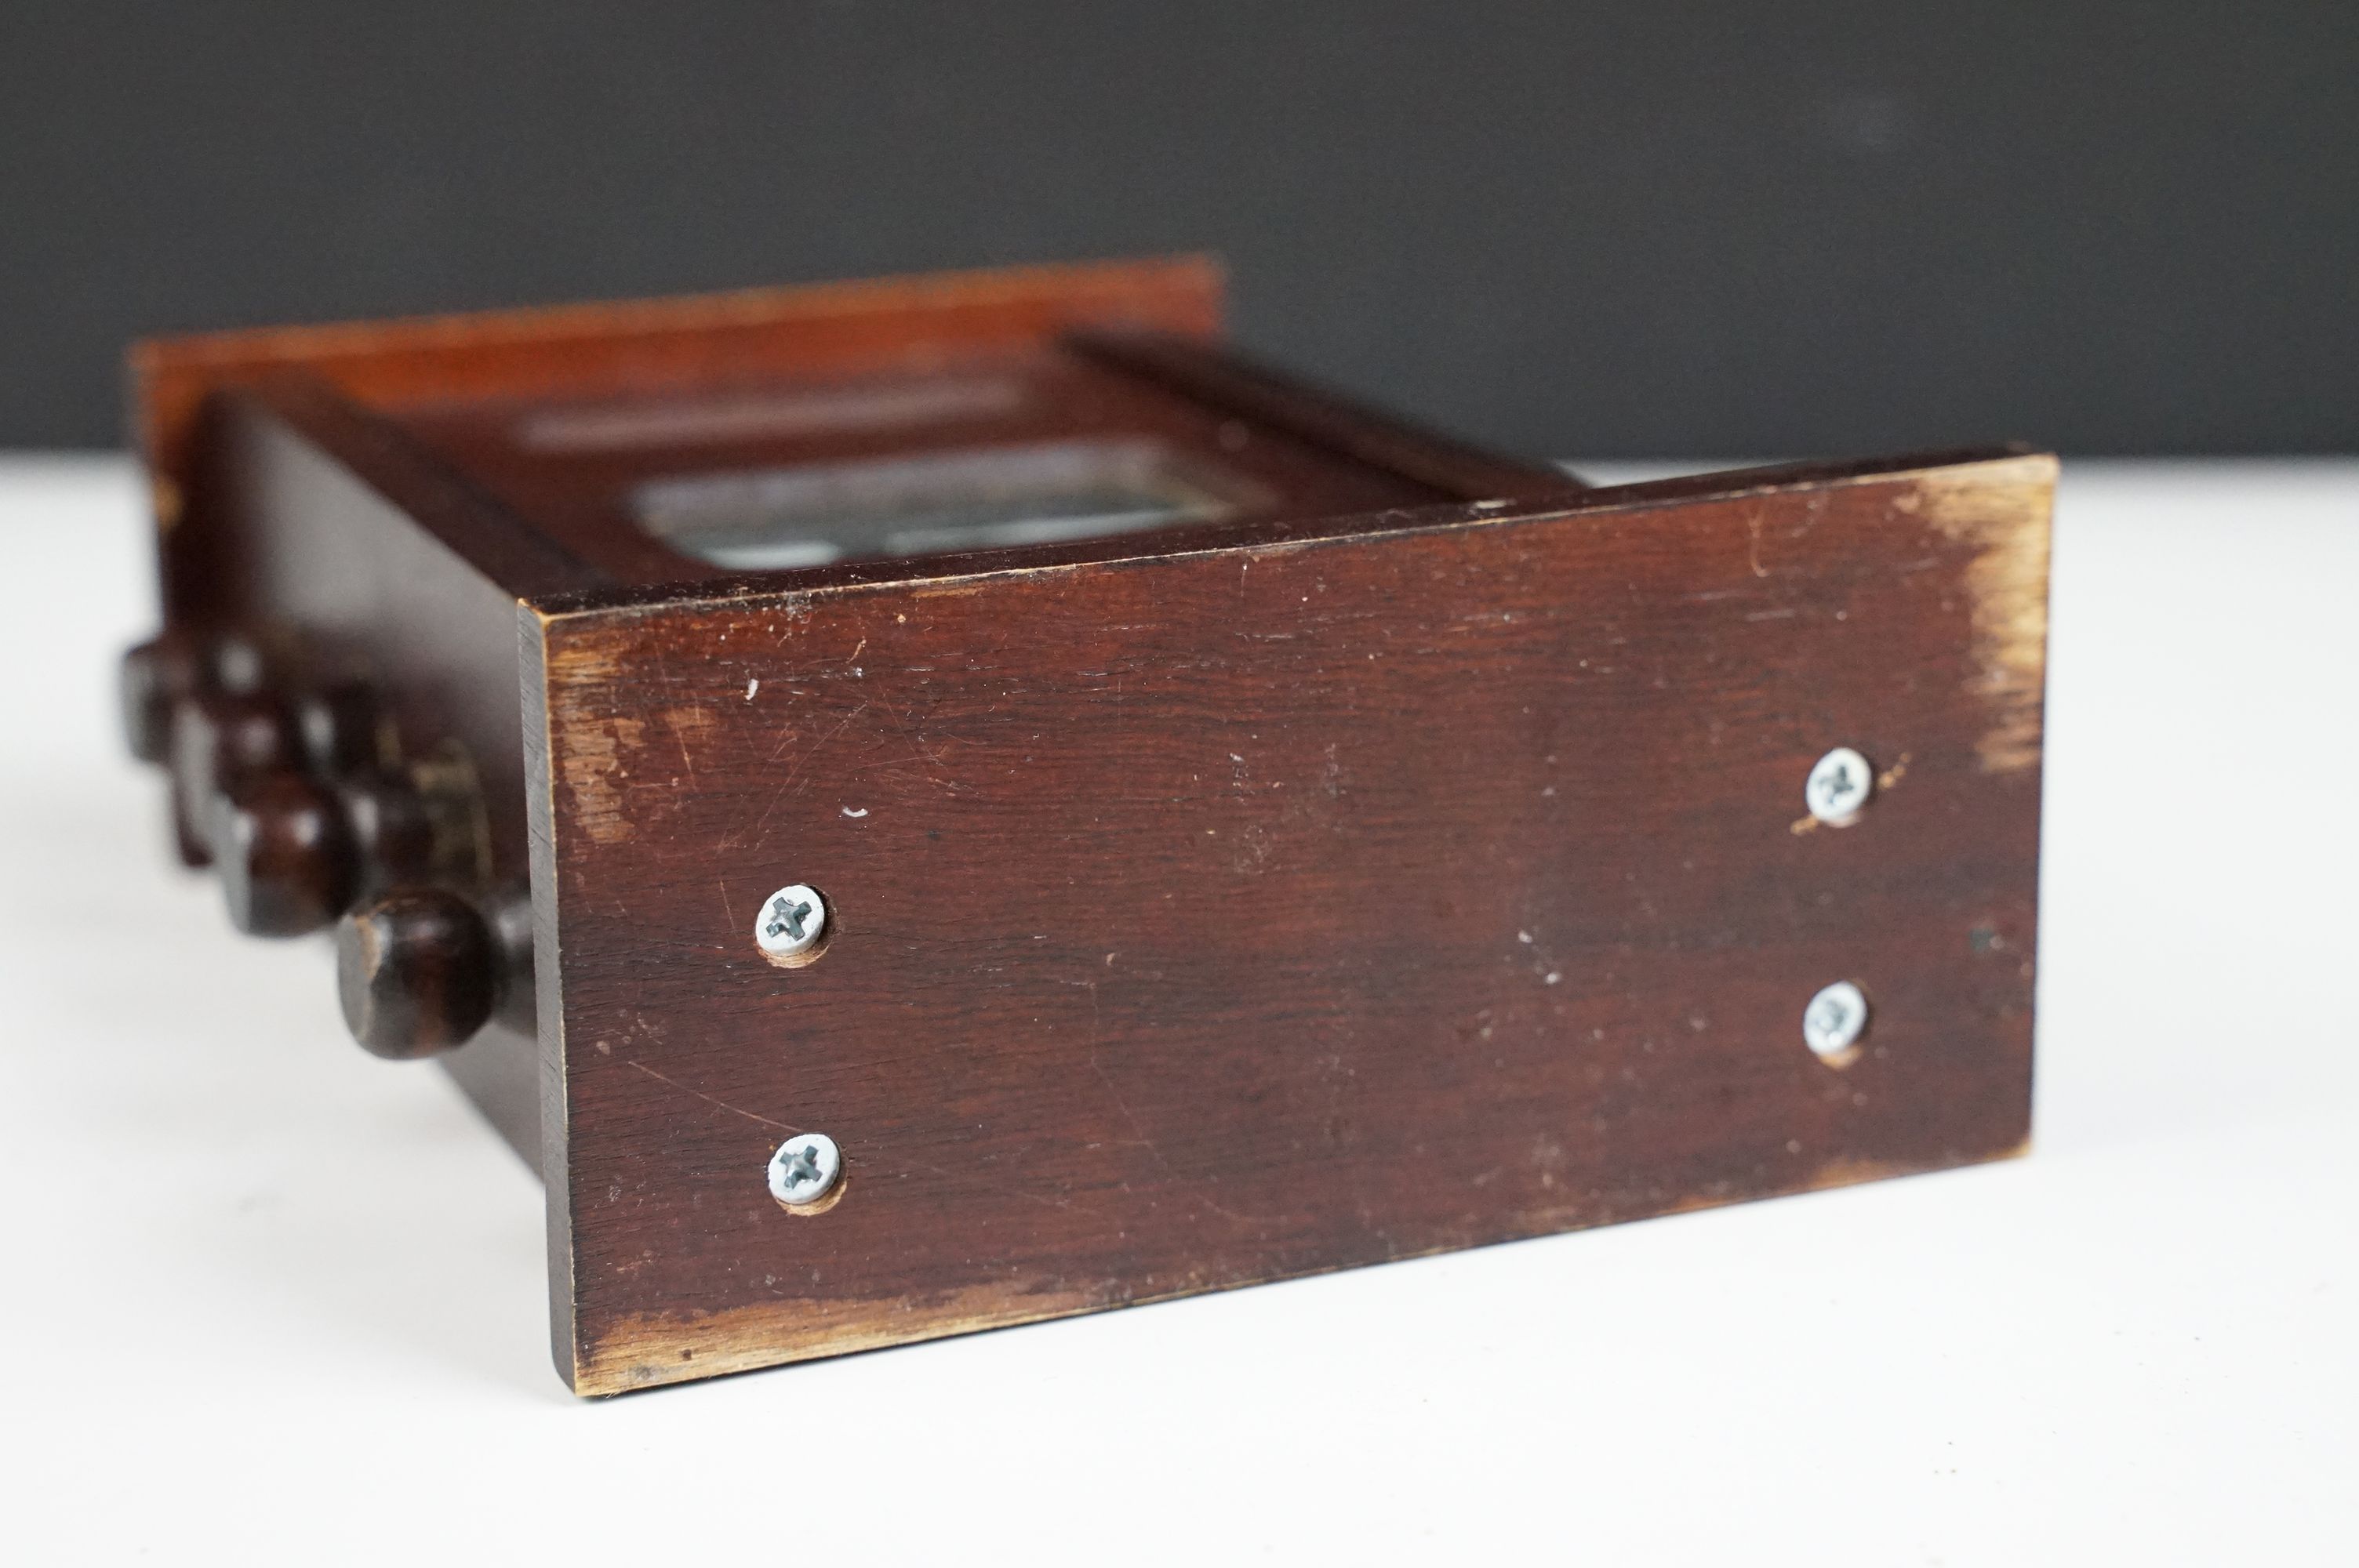 Edwardian style Wooden Cased Perpetual Desk Calendar, 18cm high - Image 5 of 5